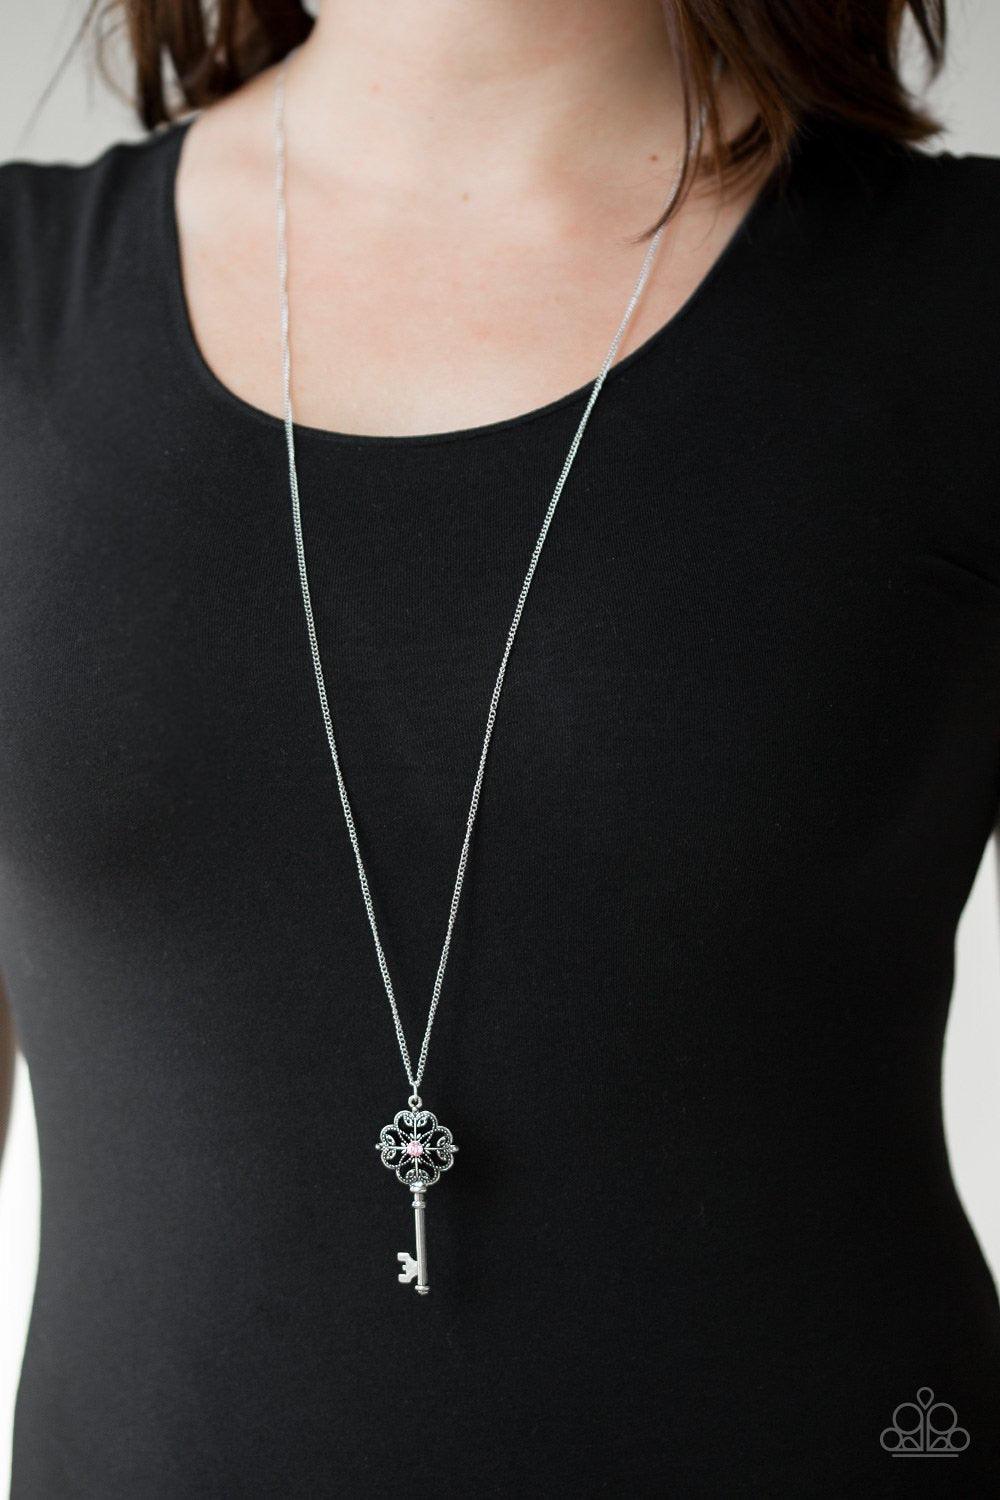 Paparazzi Accessories Got It On Lock - Silver Dotted with a glittery hematite rhinestone, a vintage inspired key pendant swings from the bottom of an elegantly elongated silver chain for a whimsical look. Features an adjustable clasp closure. Jewelry